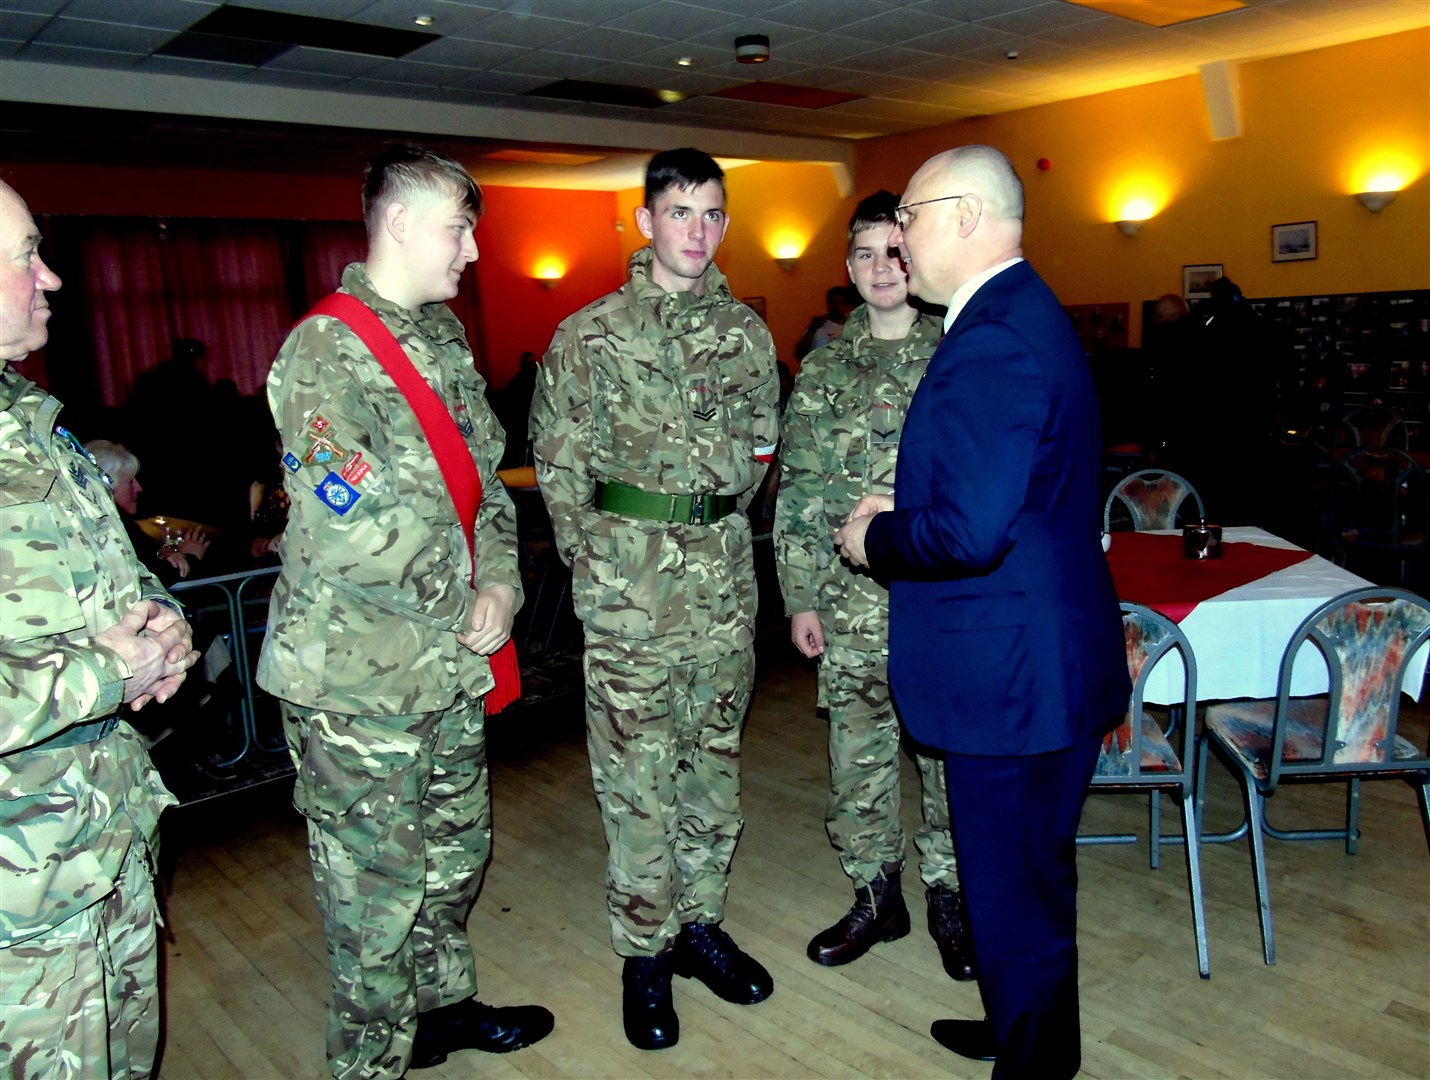 Cadets from Moray's 1st Battalion the Highlanders meet dignitaries in Invergordon.